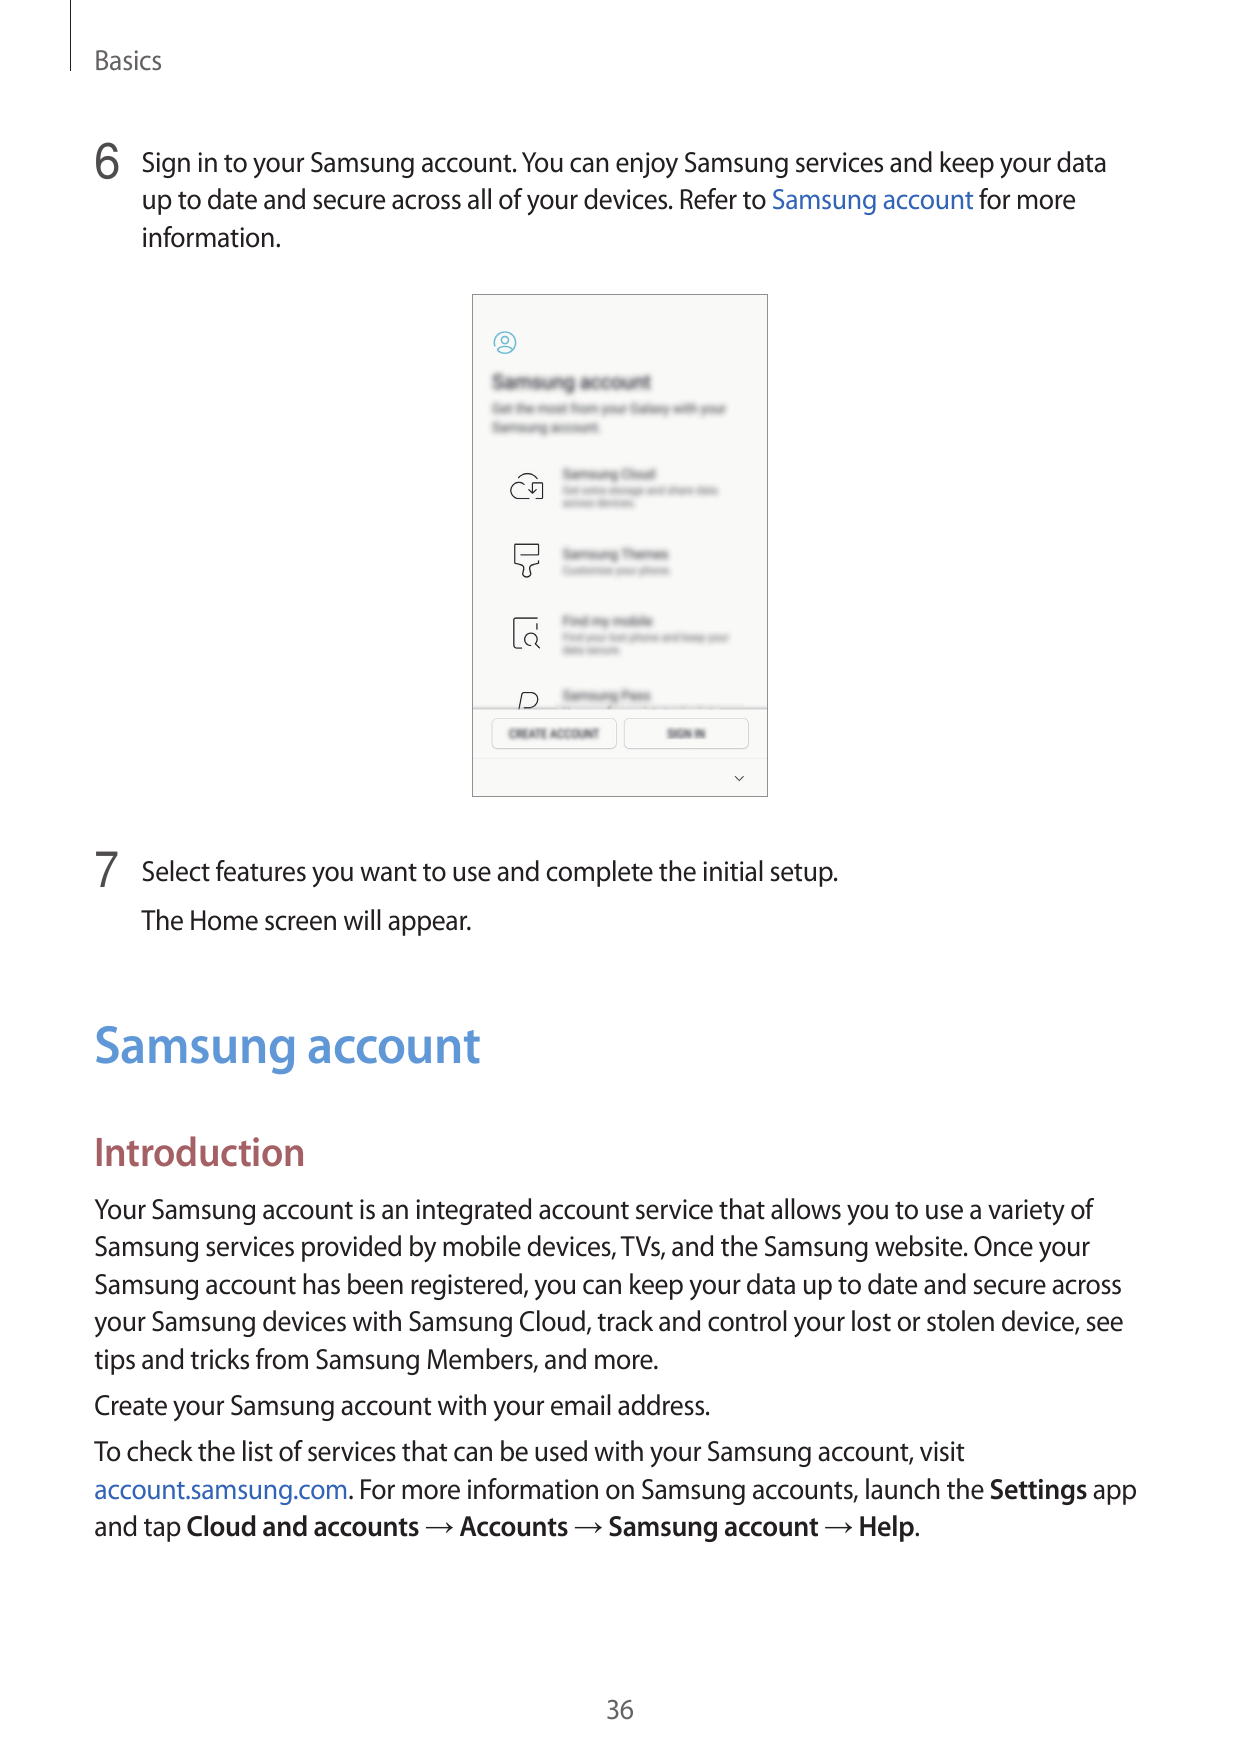 Basics6 Sign in to your Samsung account. You can enjoy Samsung services and keep your dataup to date and secure across all of yo